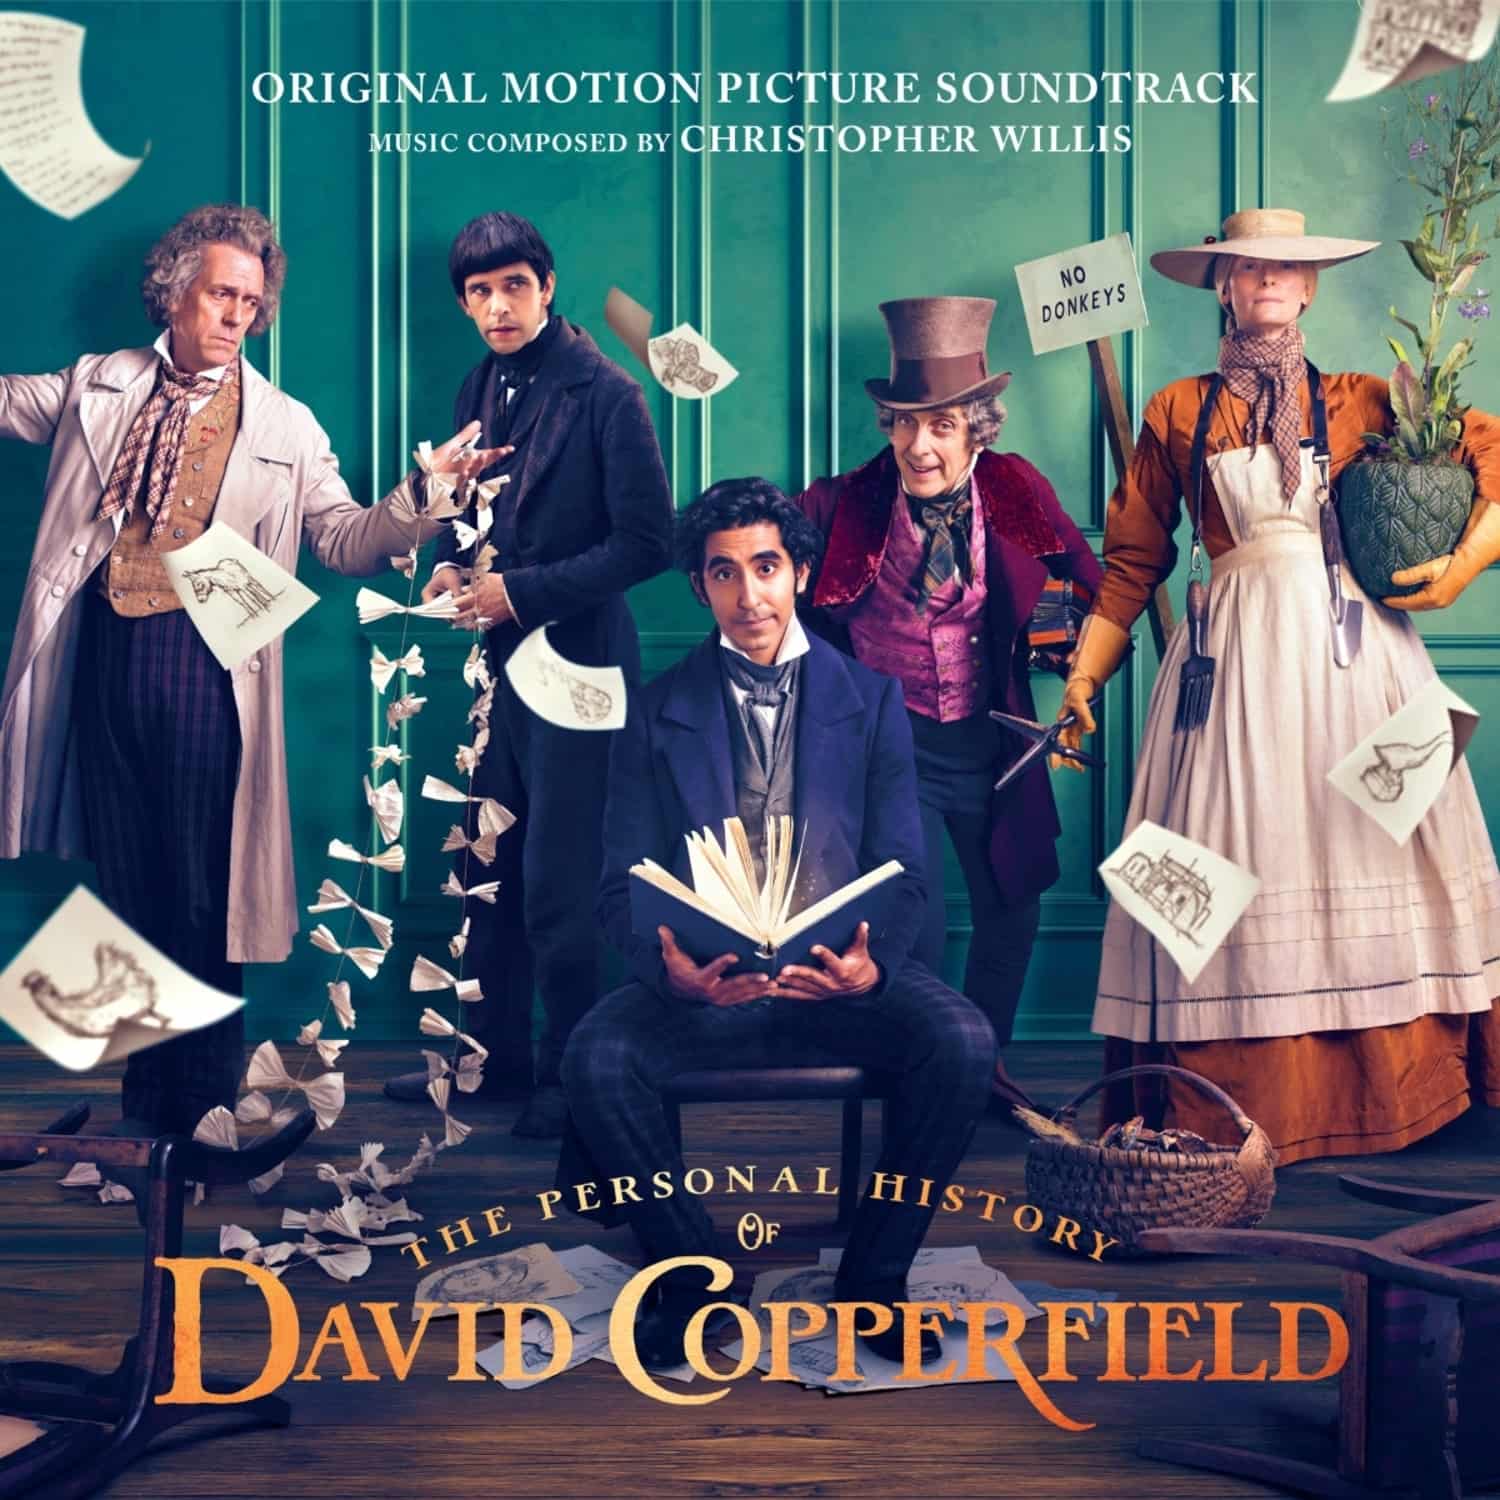 Christopher OST/Willis - THE PERSONAL HISTORY OF DAVID COPPERFIELD 